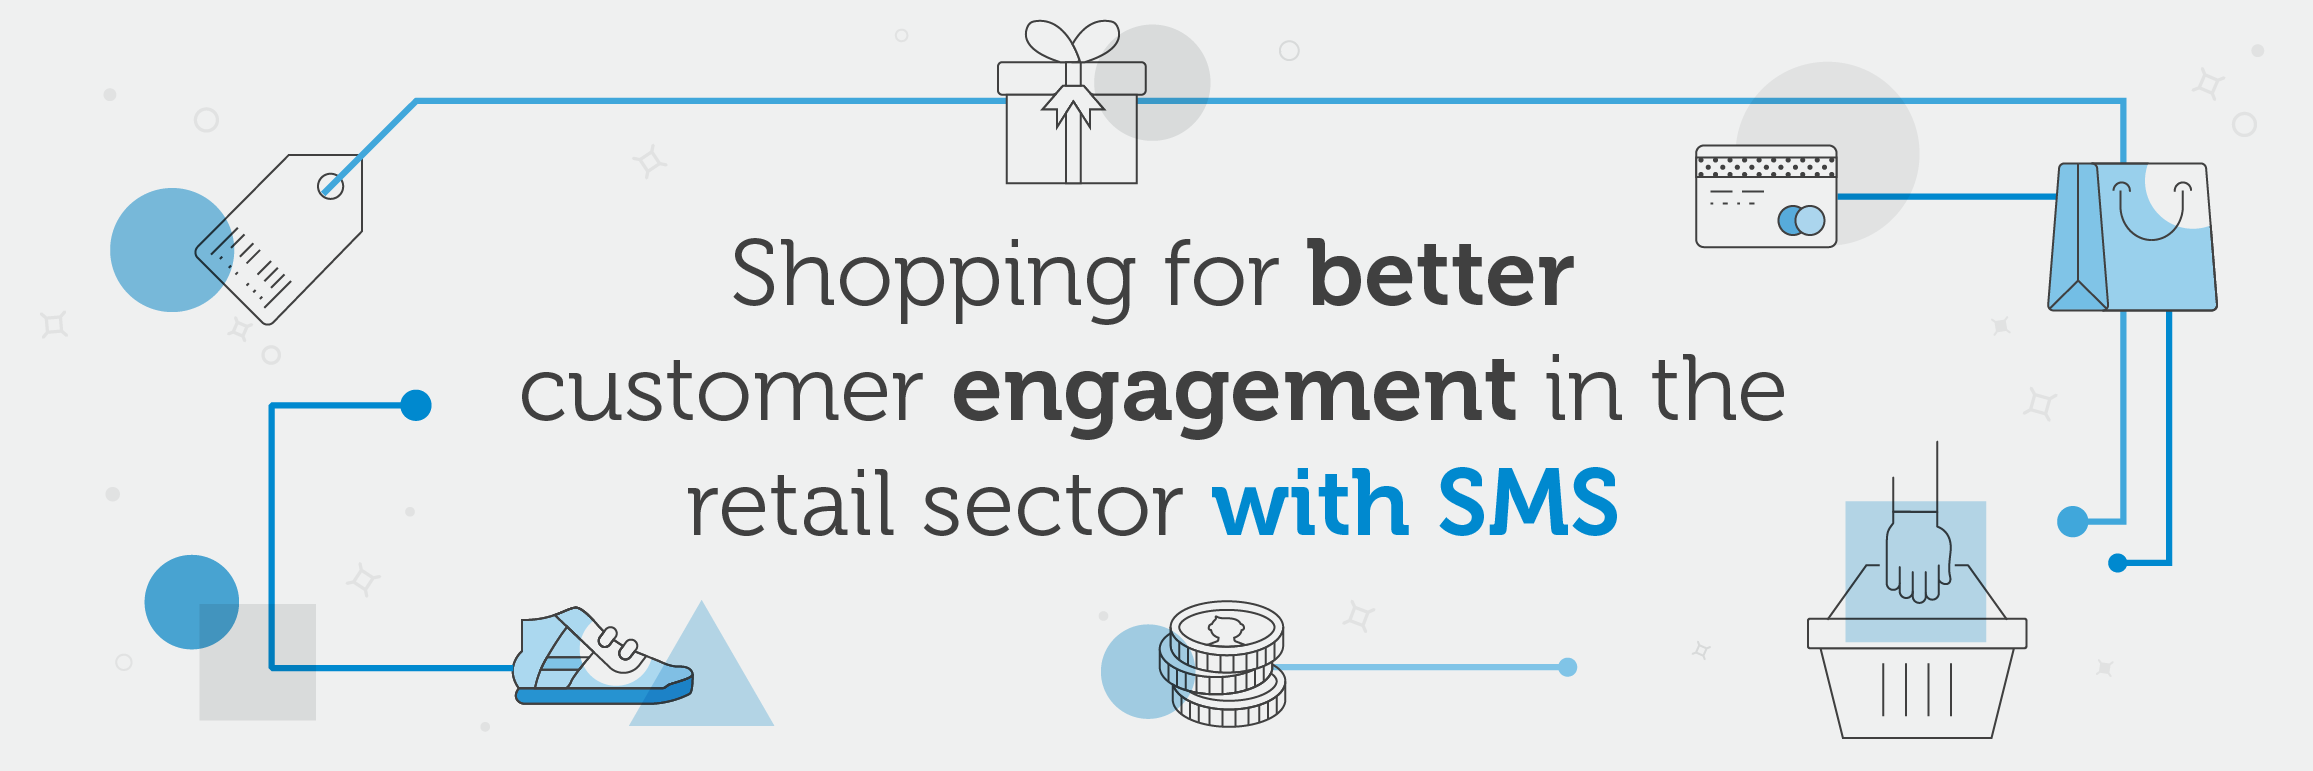 How SMS can help with your customer comms in the retail sector infographic